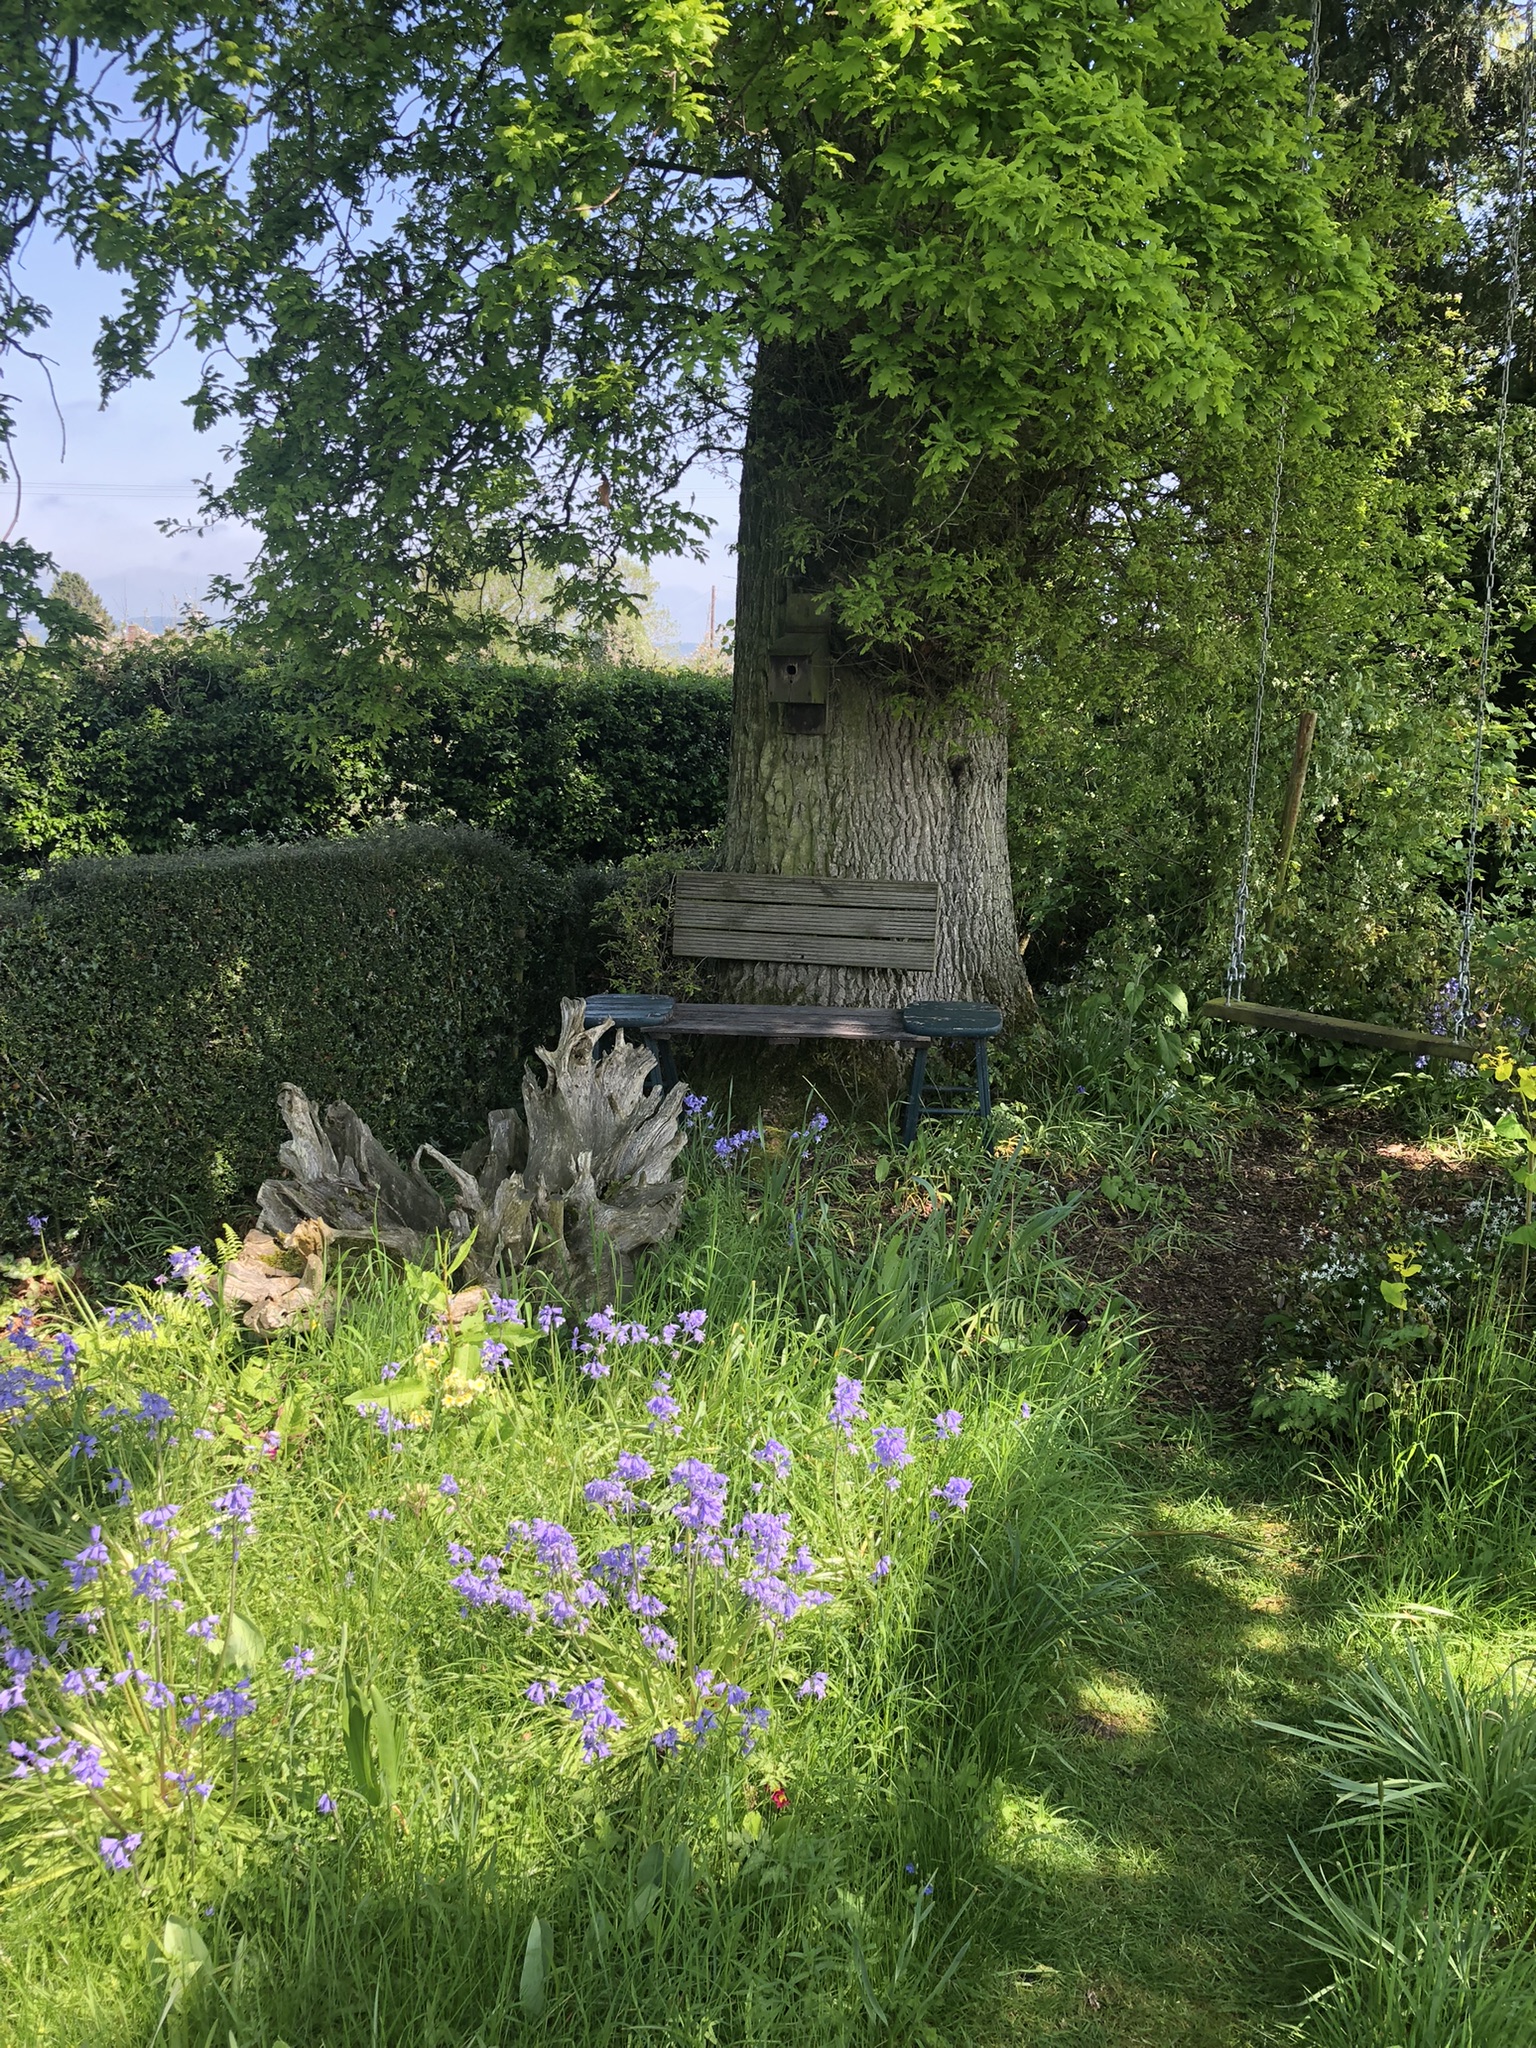 Putley Open Gardens showing a lovely peaceful corner of the Sheepcote with a bench and swing